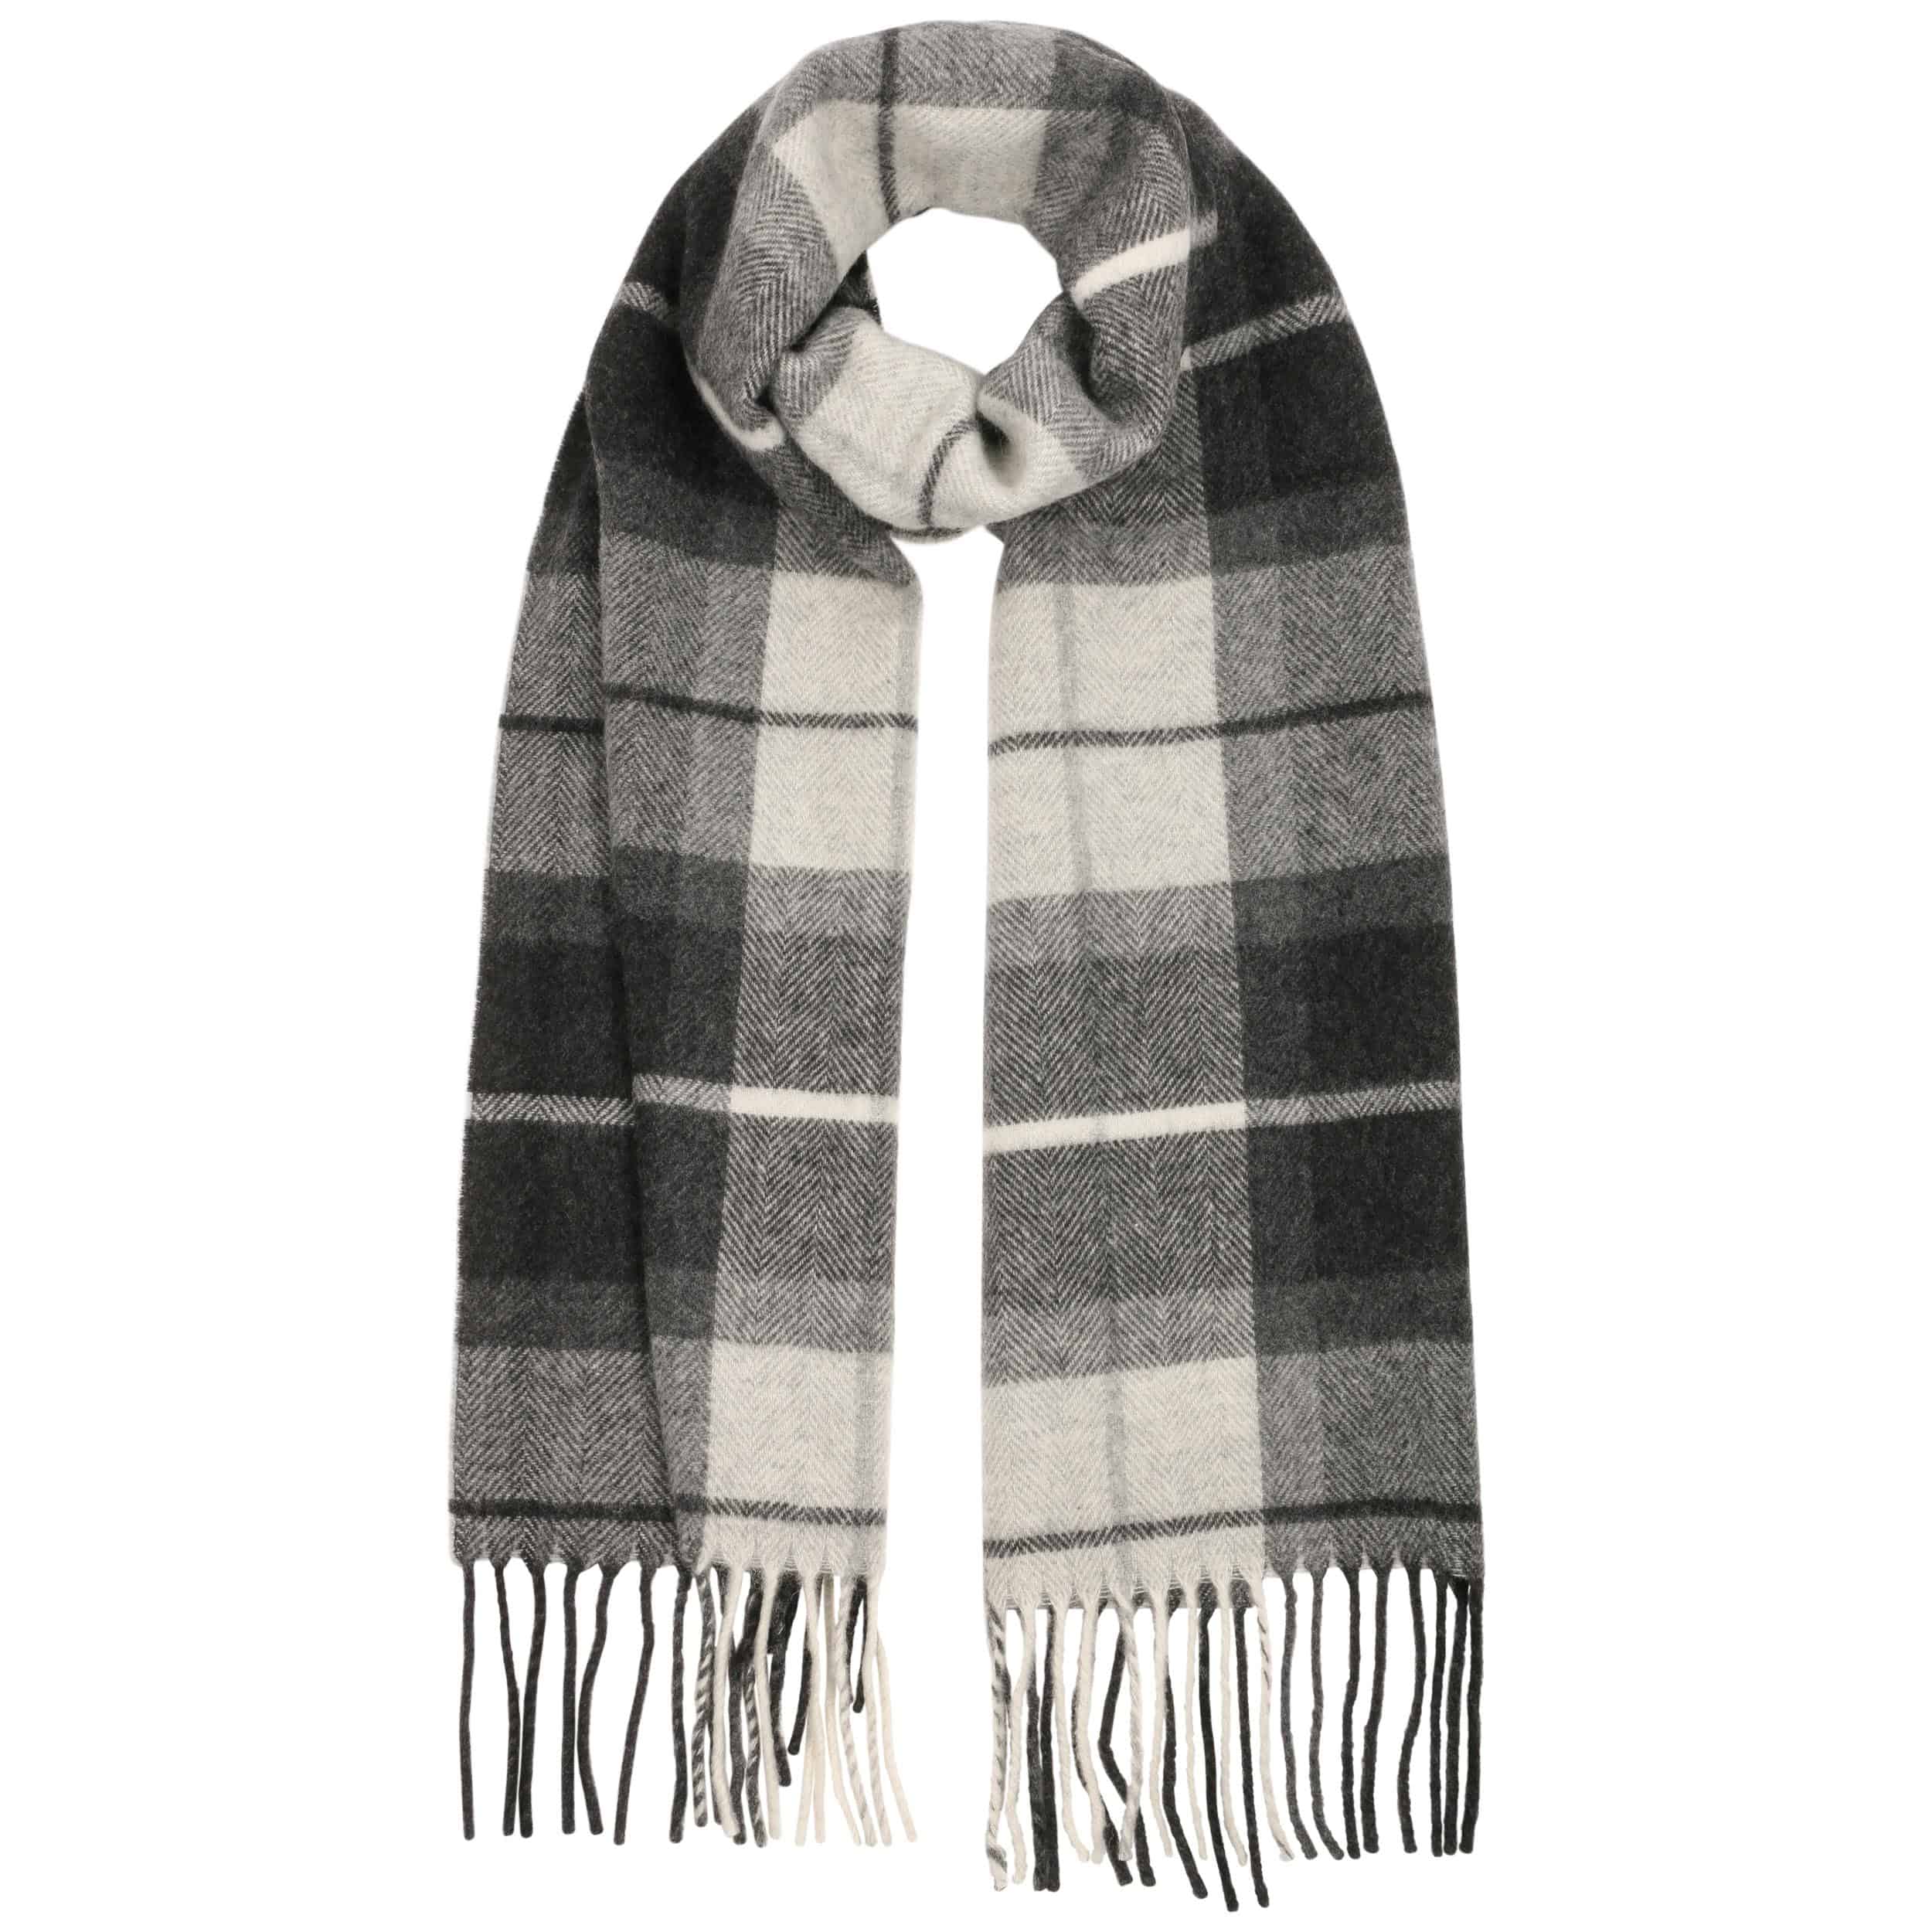 Lambswool Checks Scarf by McBURN - 53,95